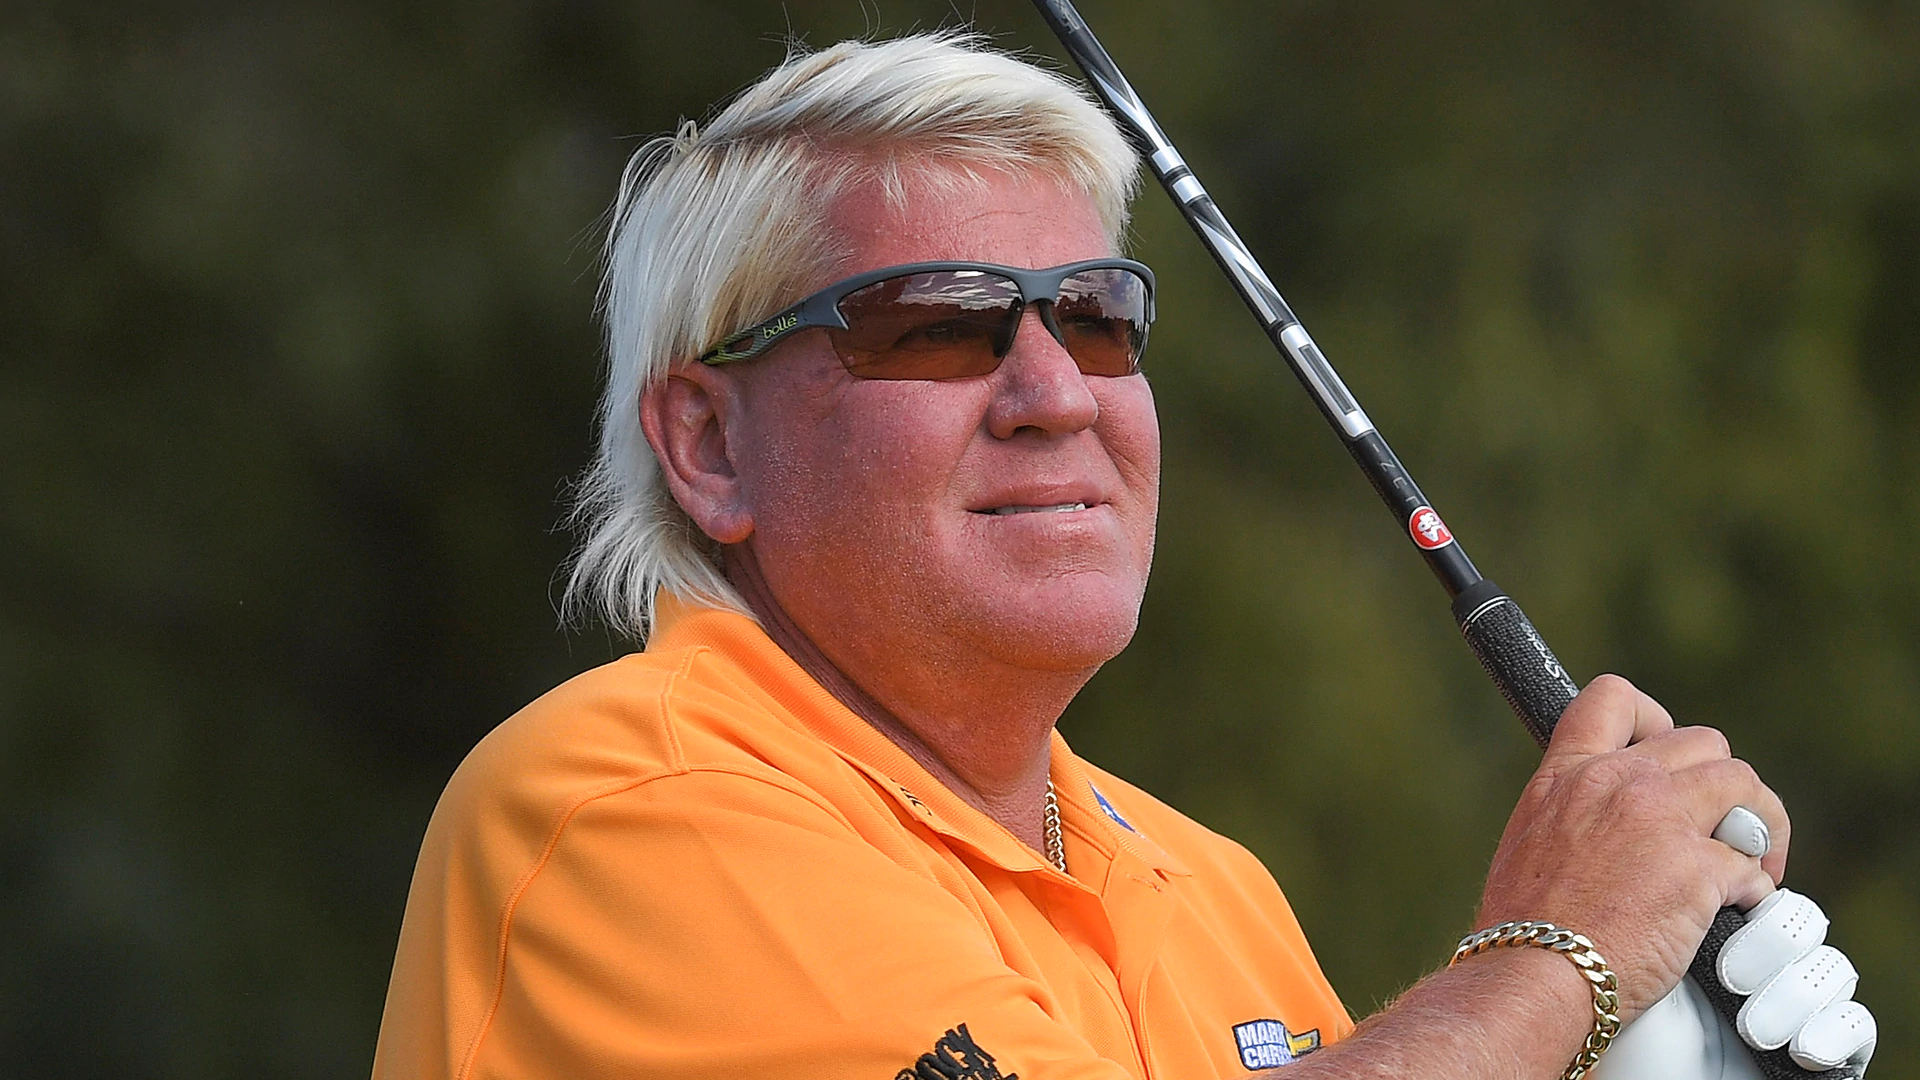 'Maybe there's a miracle': John Daly reveals bladder cancer diagnosis 2